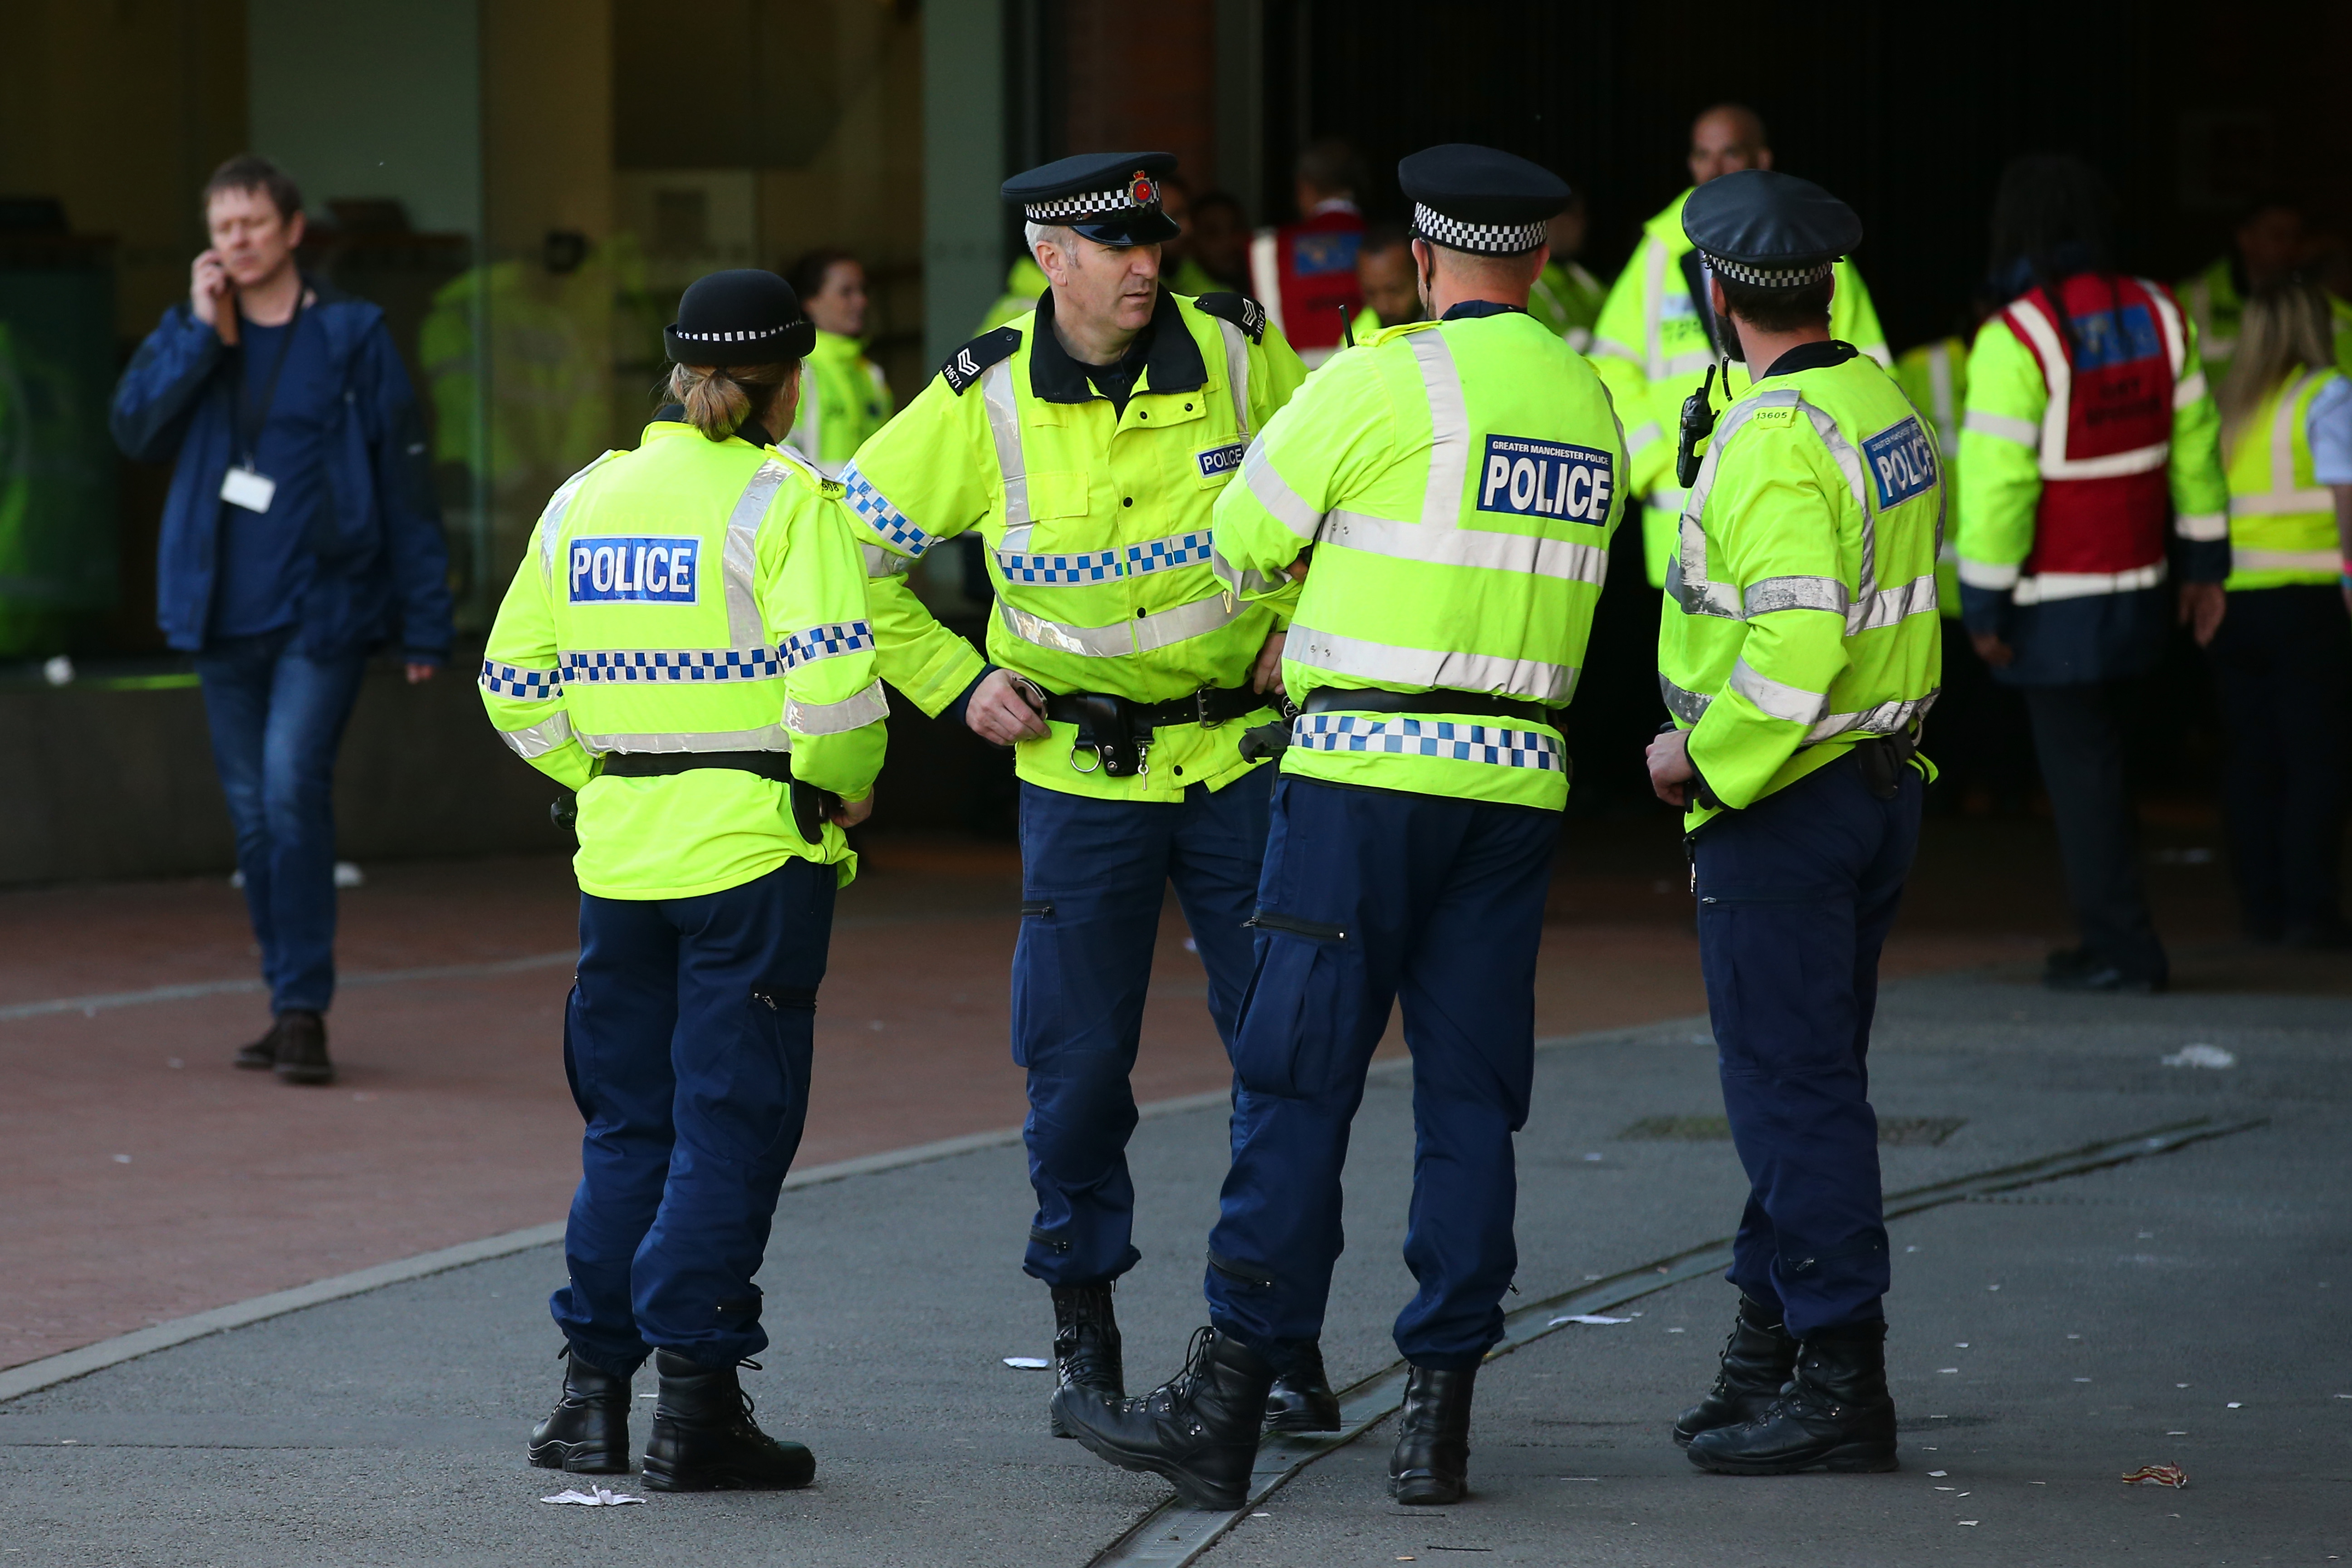 Police patrol outside after the game was abandoned with fans evacuated from the ground prior to the Barclays Premier League match between Manchester United and AFC Bournemouth at Old Trafford on May 15, 2016 in Manchester, England. (Getty)